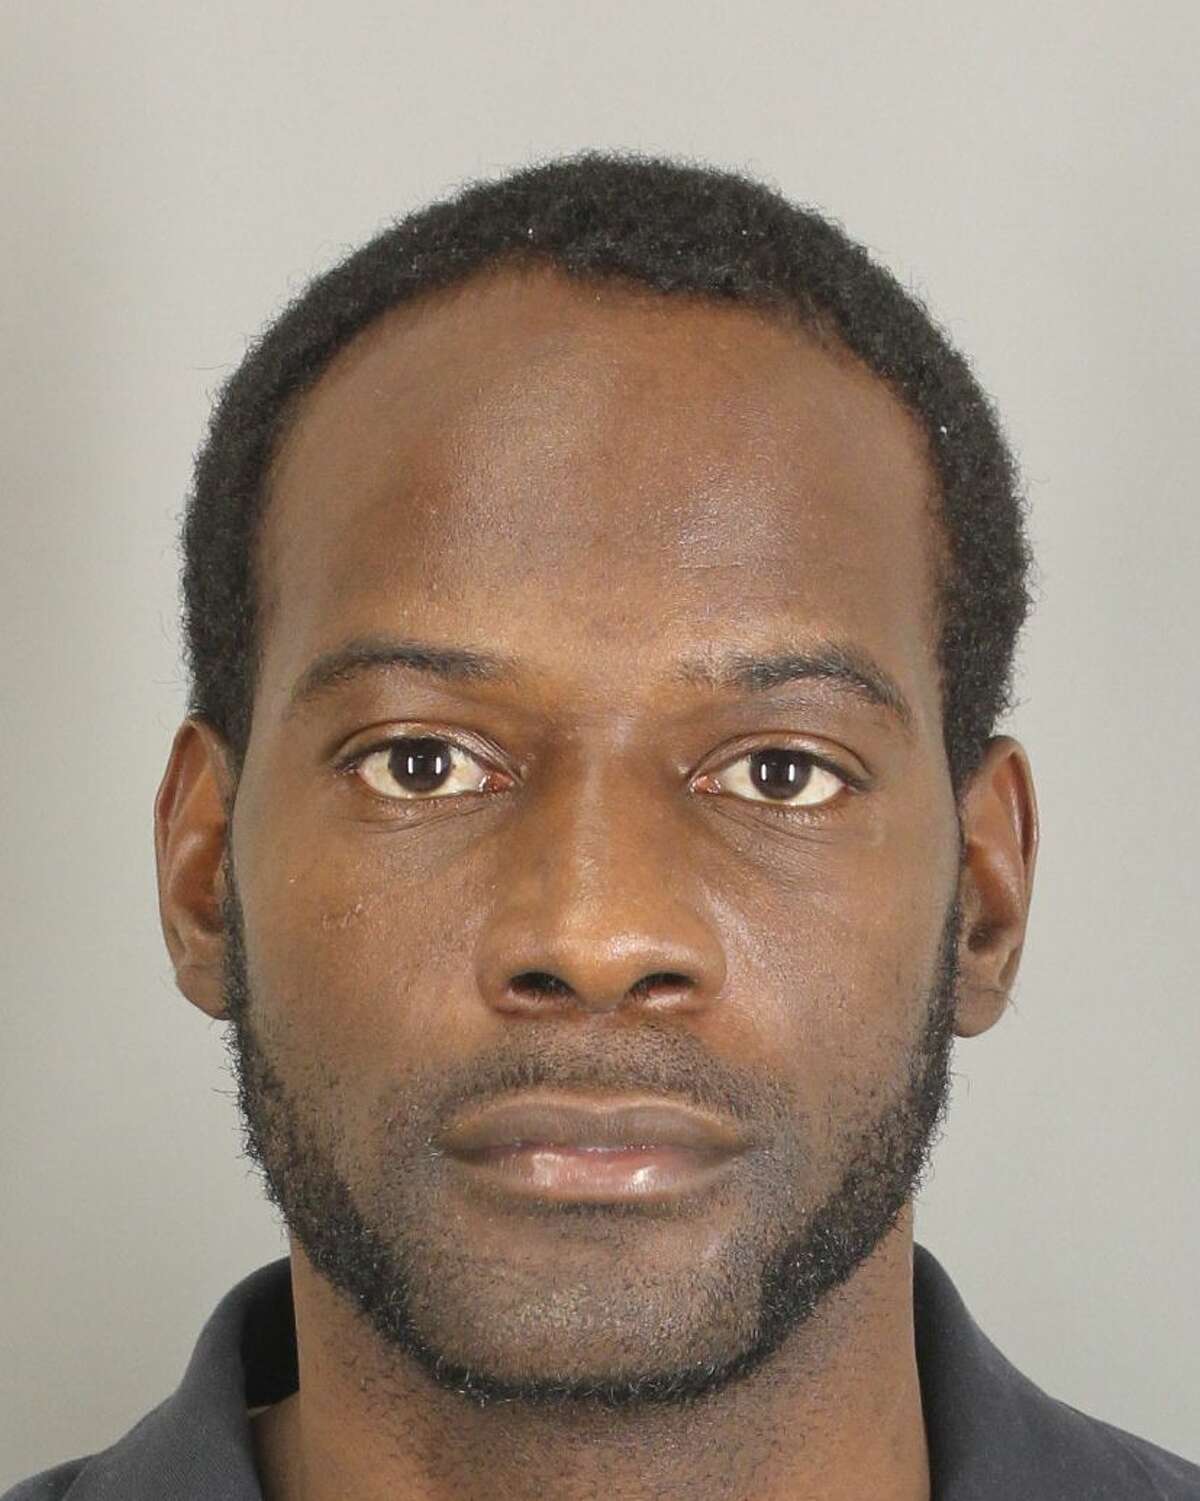 Artavias Cole, 28, was convicted of two counts of robbery. Photo provided by Jefferson County Sheriff's Office.